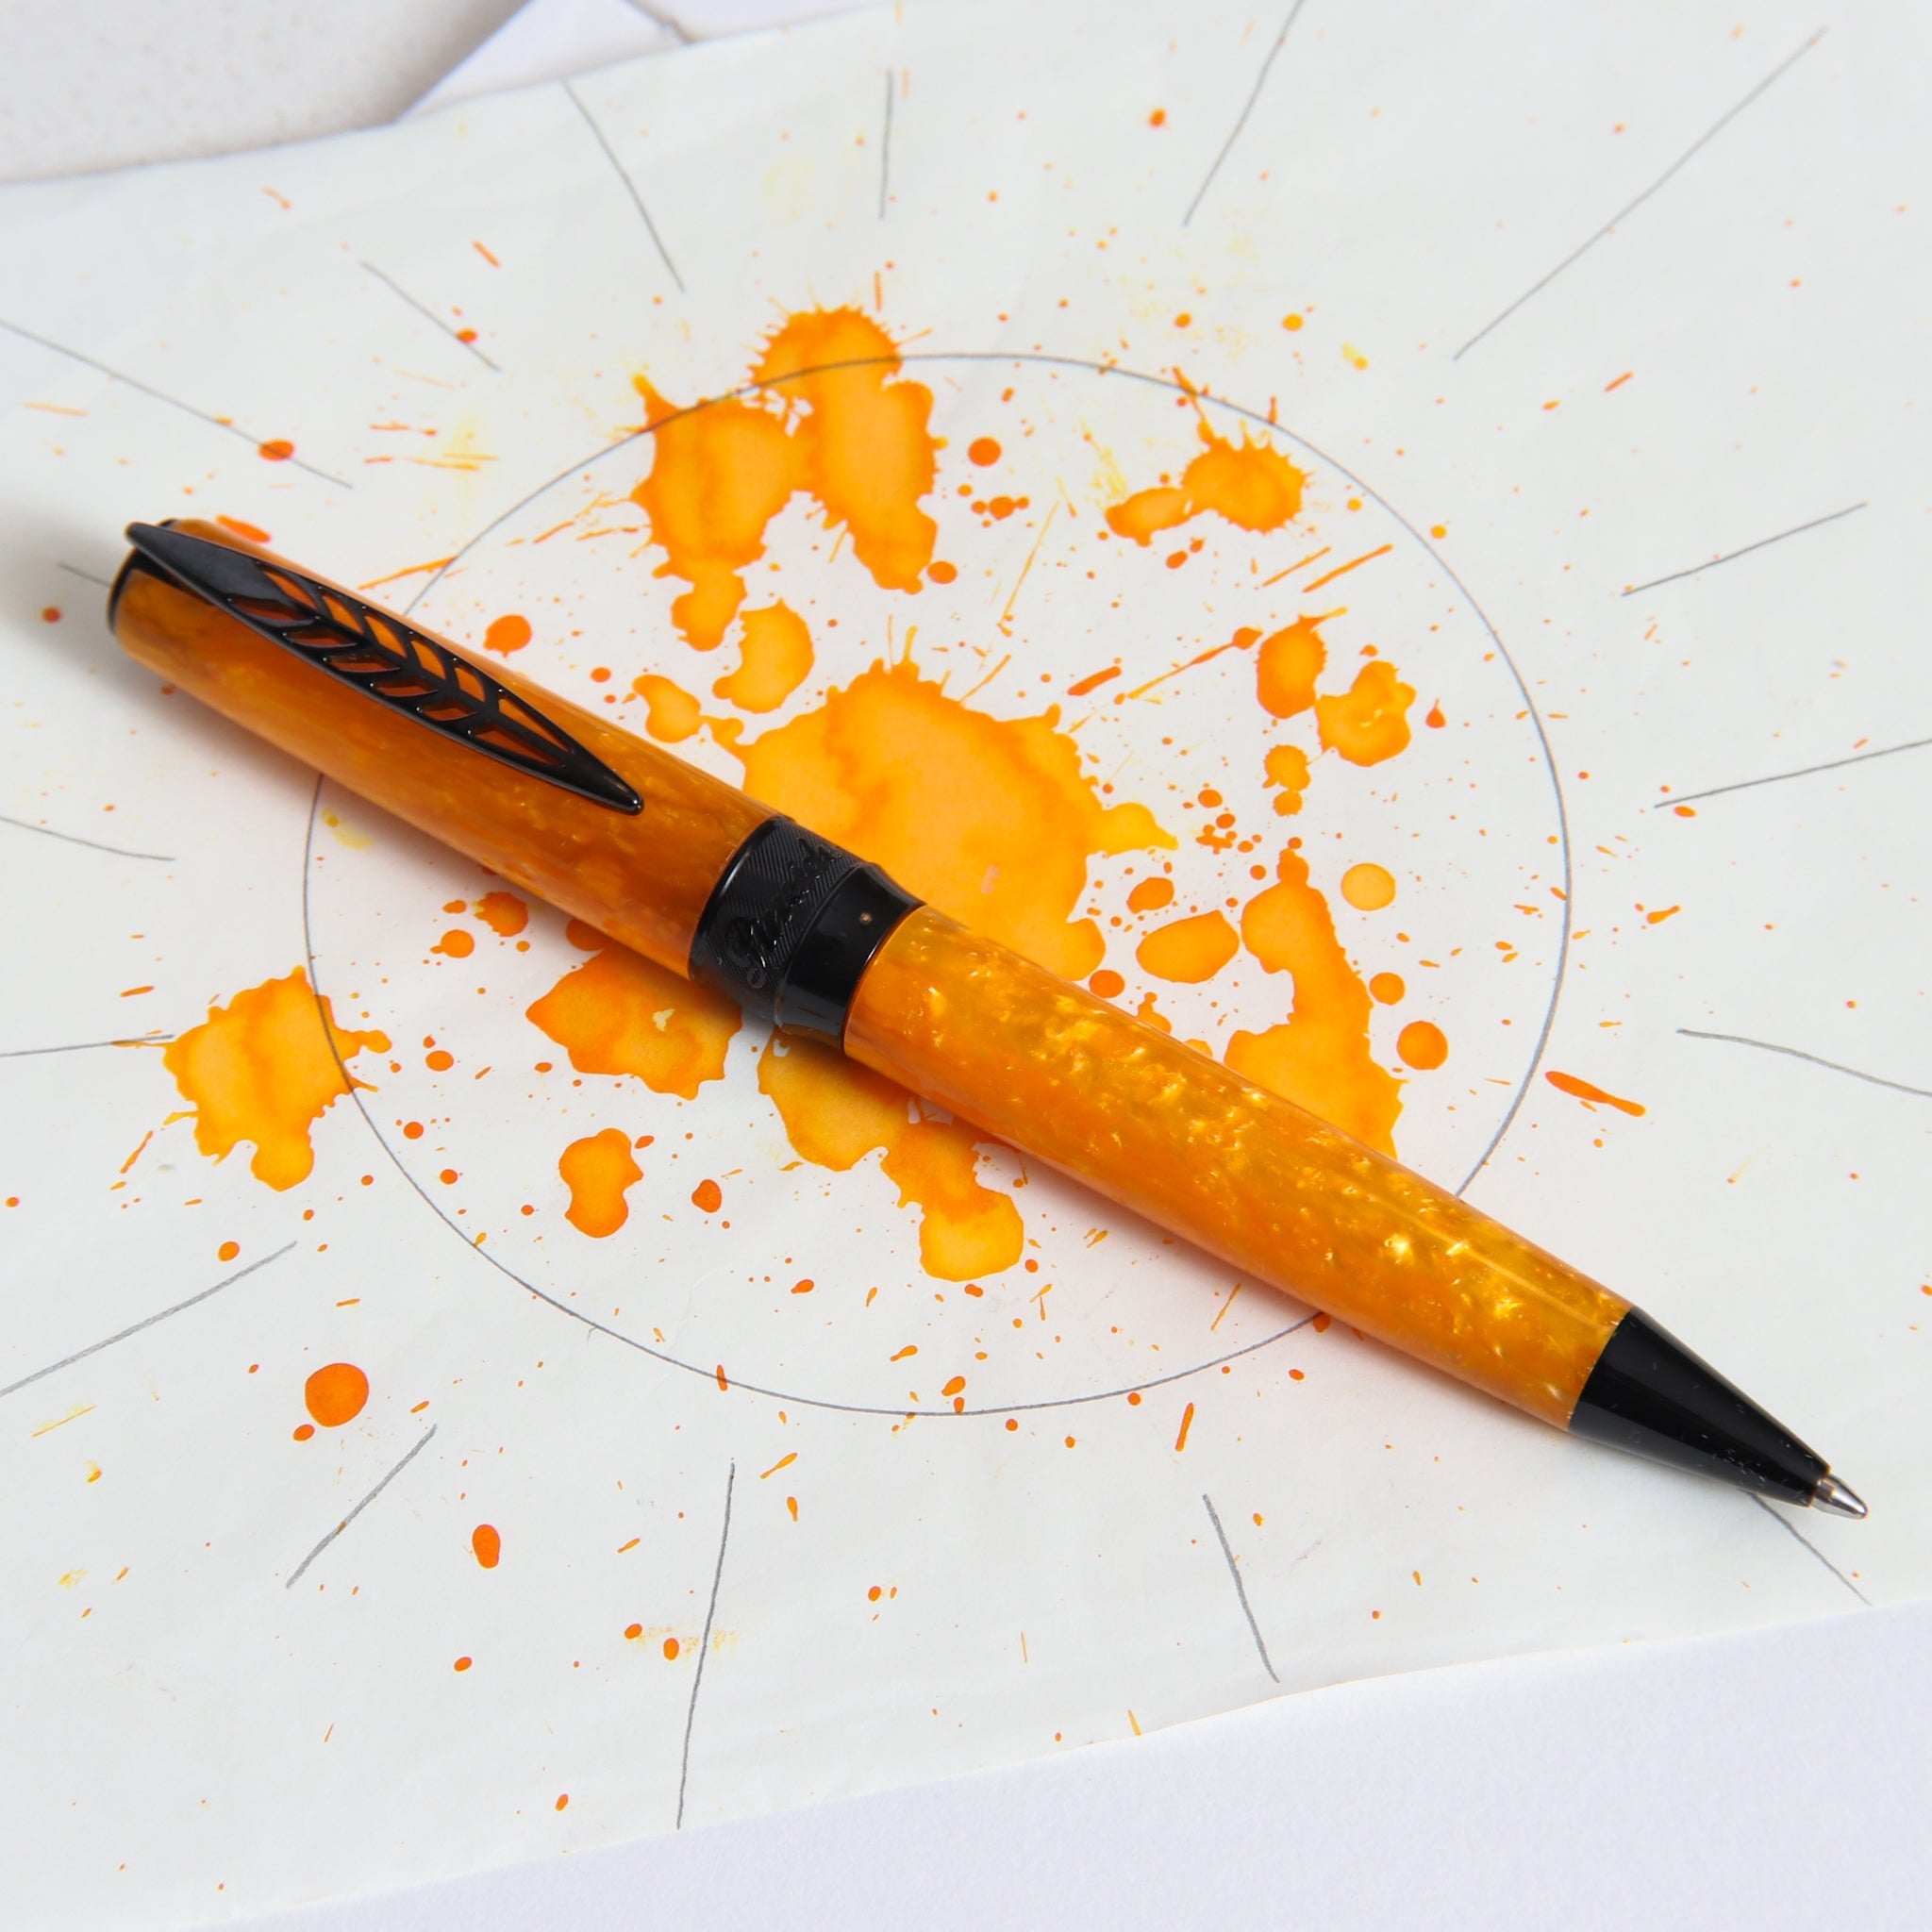 A Montegrappa roller ball pen in orange, together with a Louis